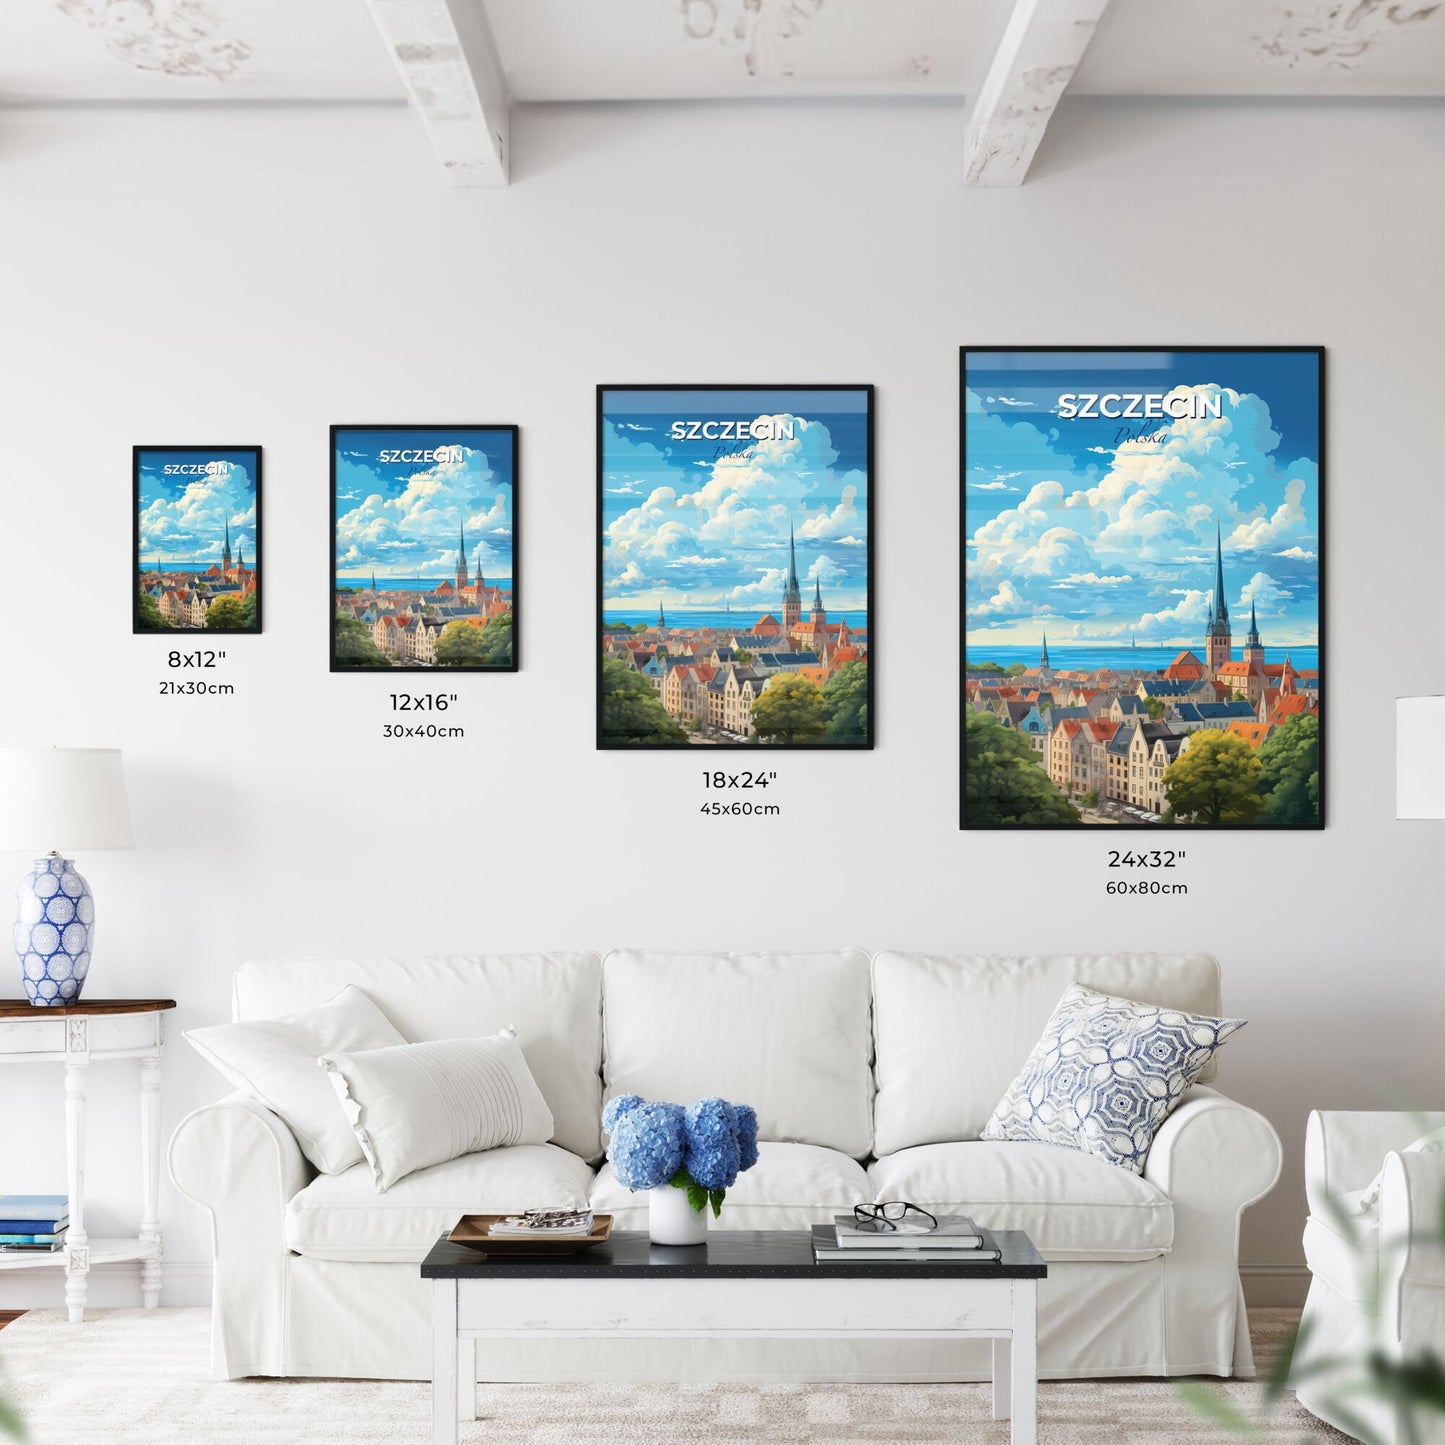 Szczecin Polska Skyline - A City With A Tall Spire And A Body Of Water - Customizable Travel Gift Default Title